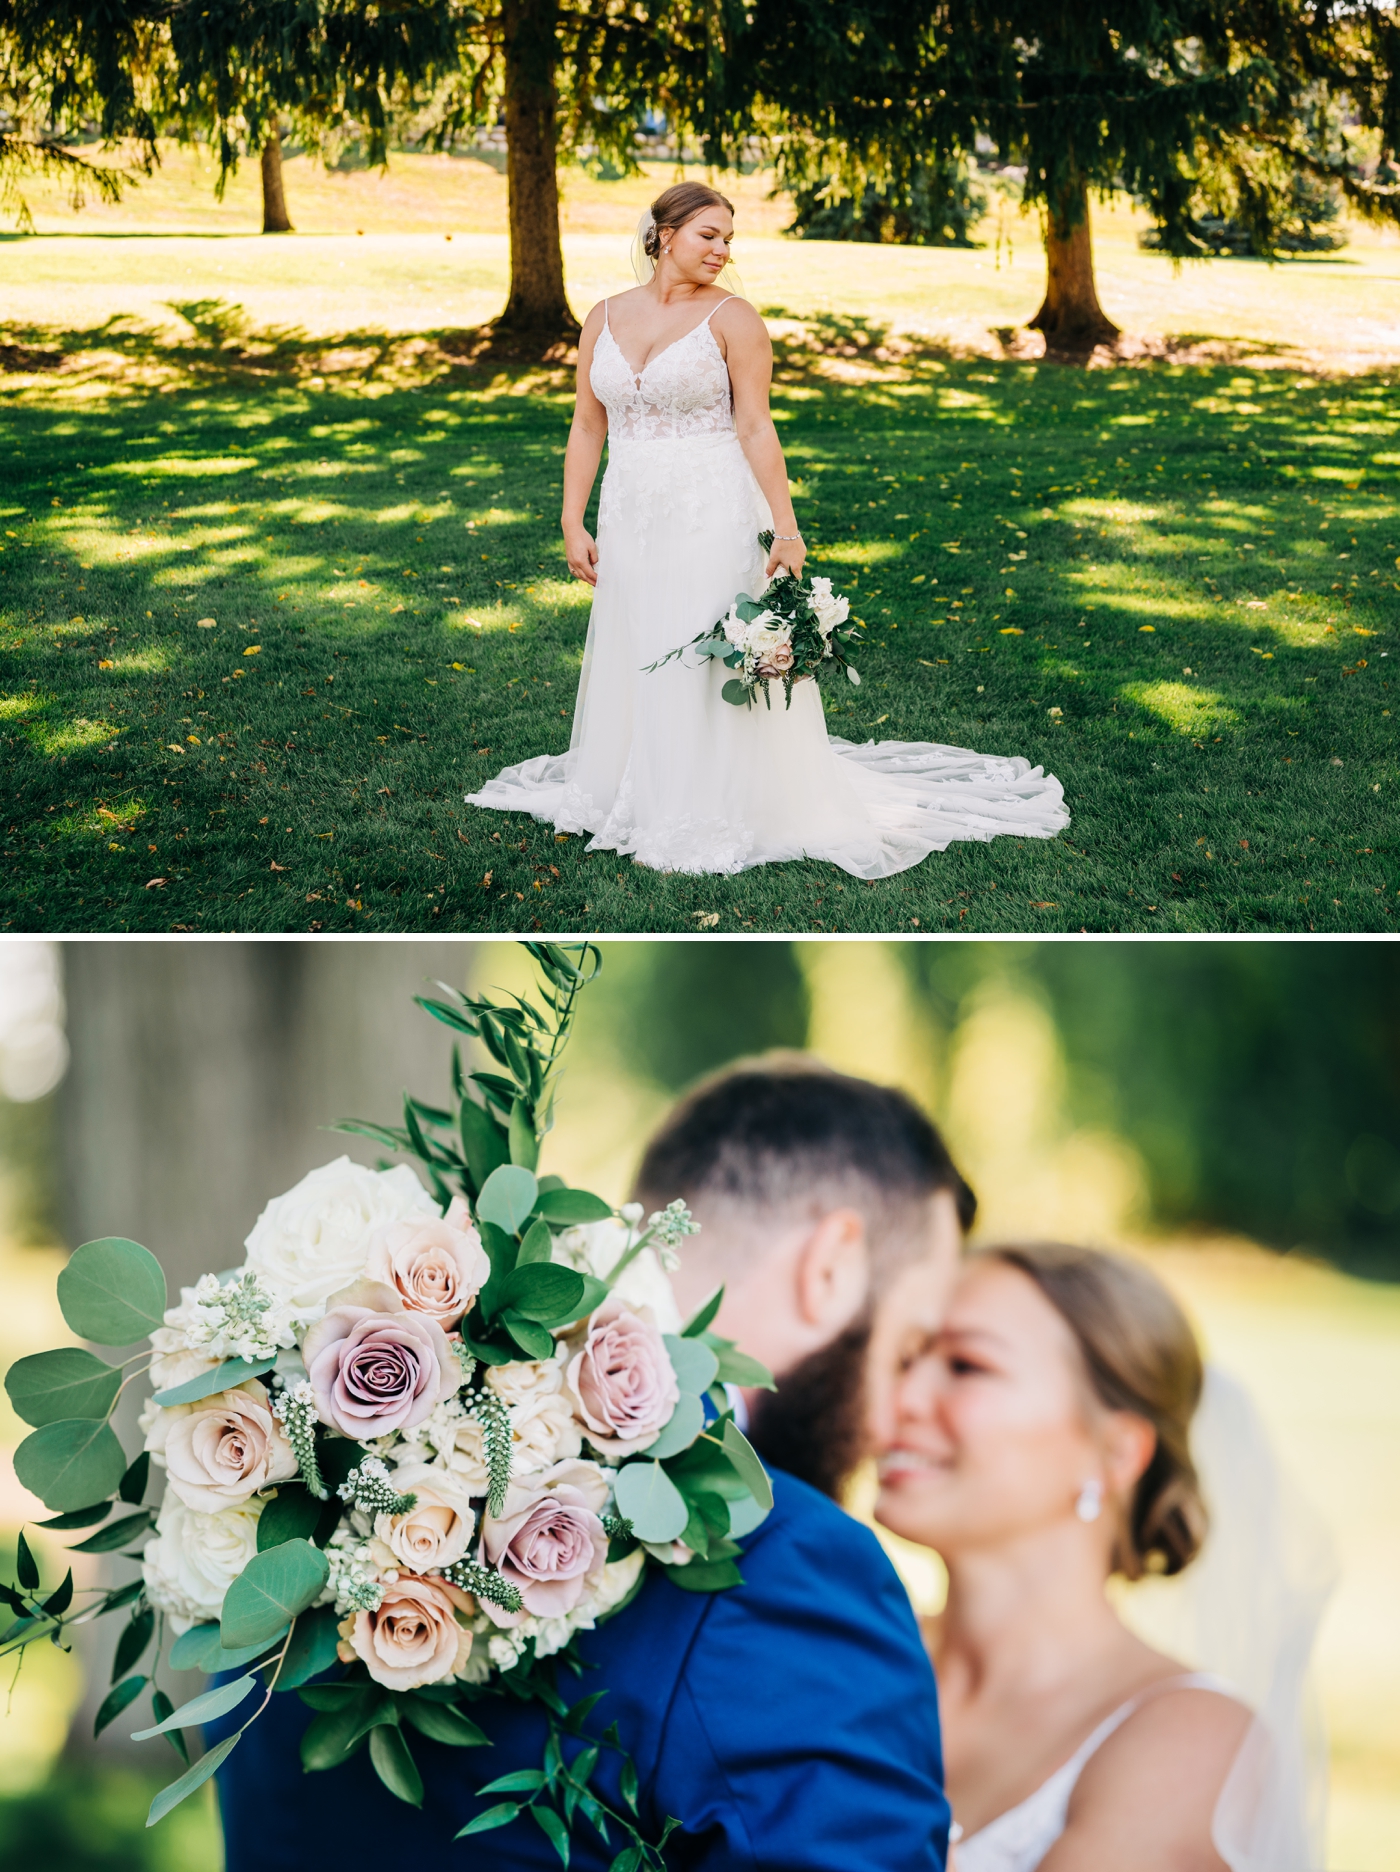 Bridal portrait with bride holding white and blush wedding bouquet